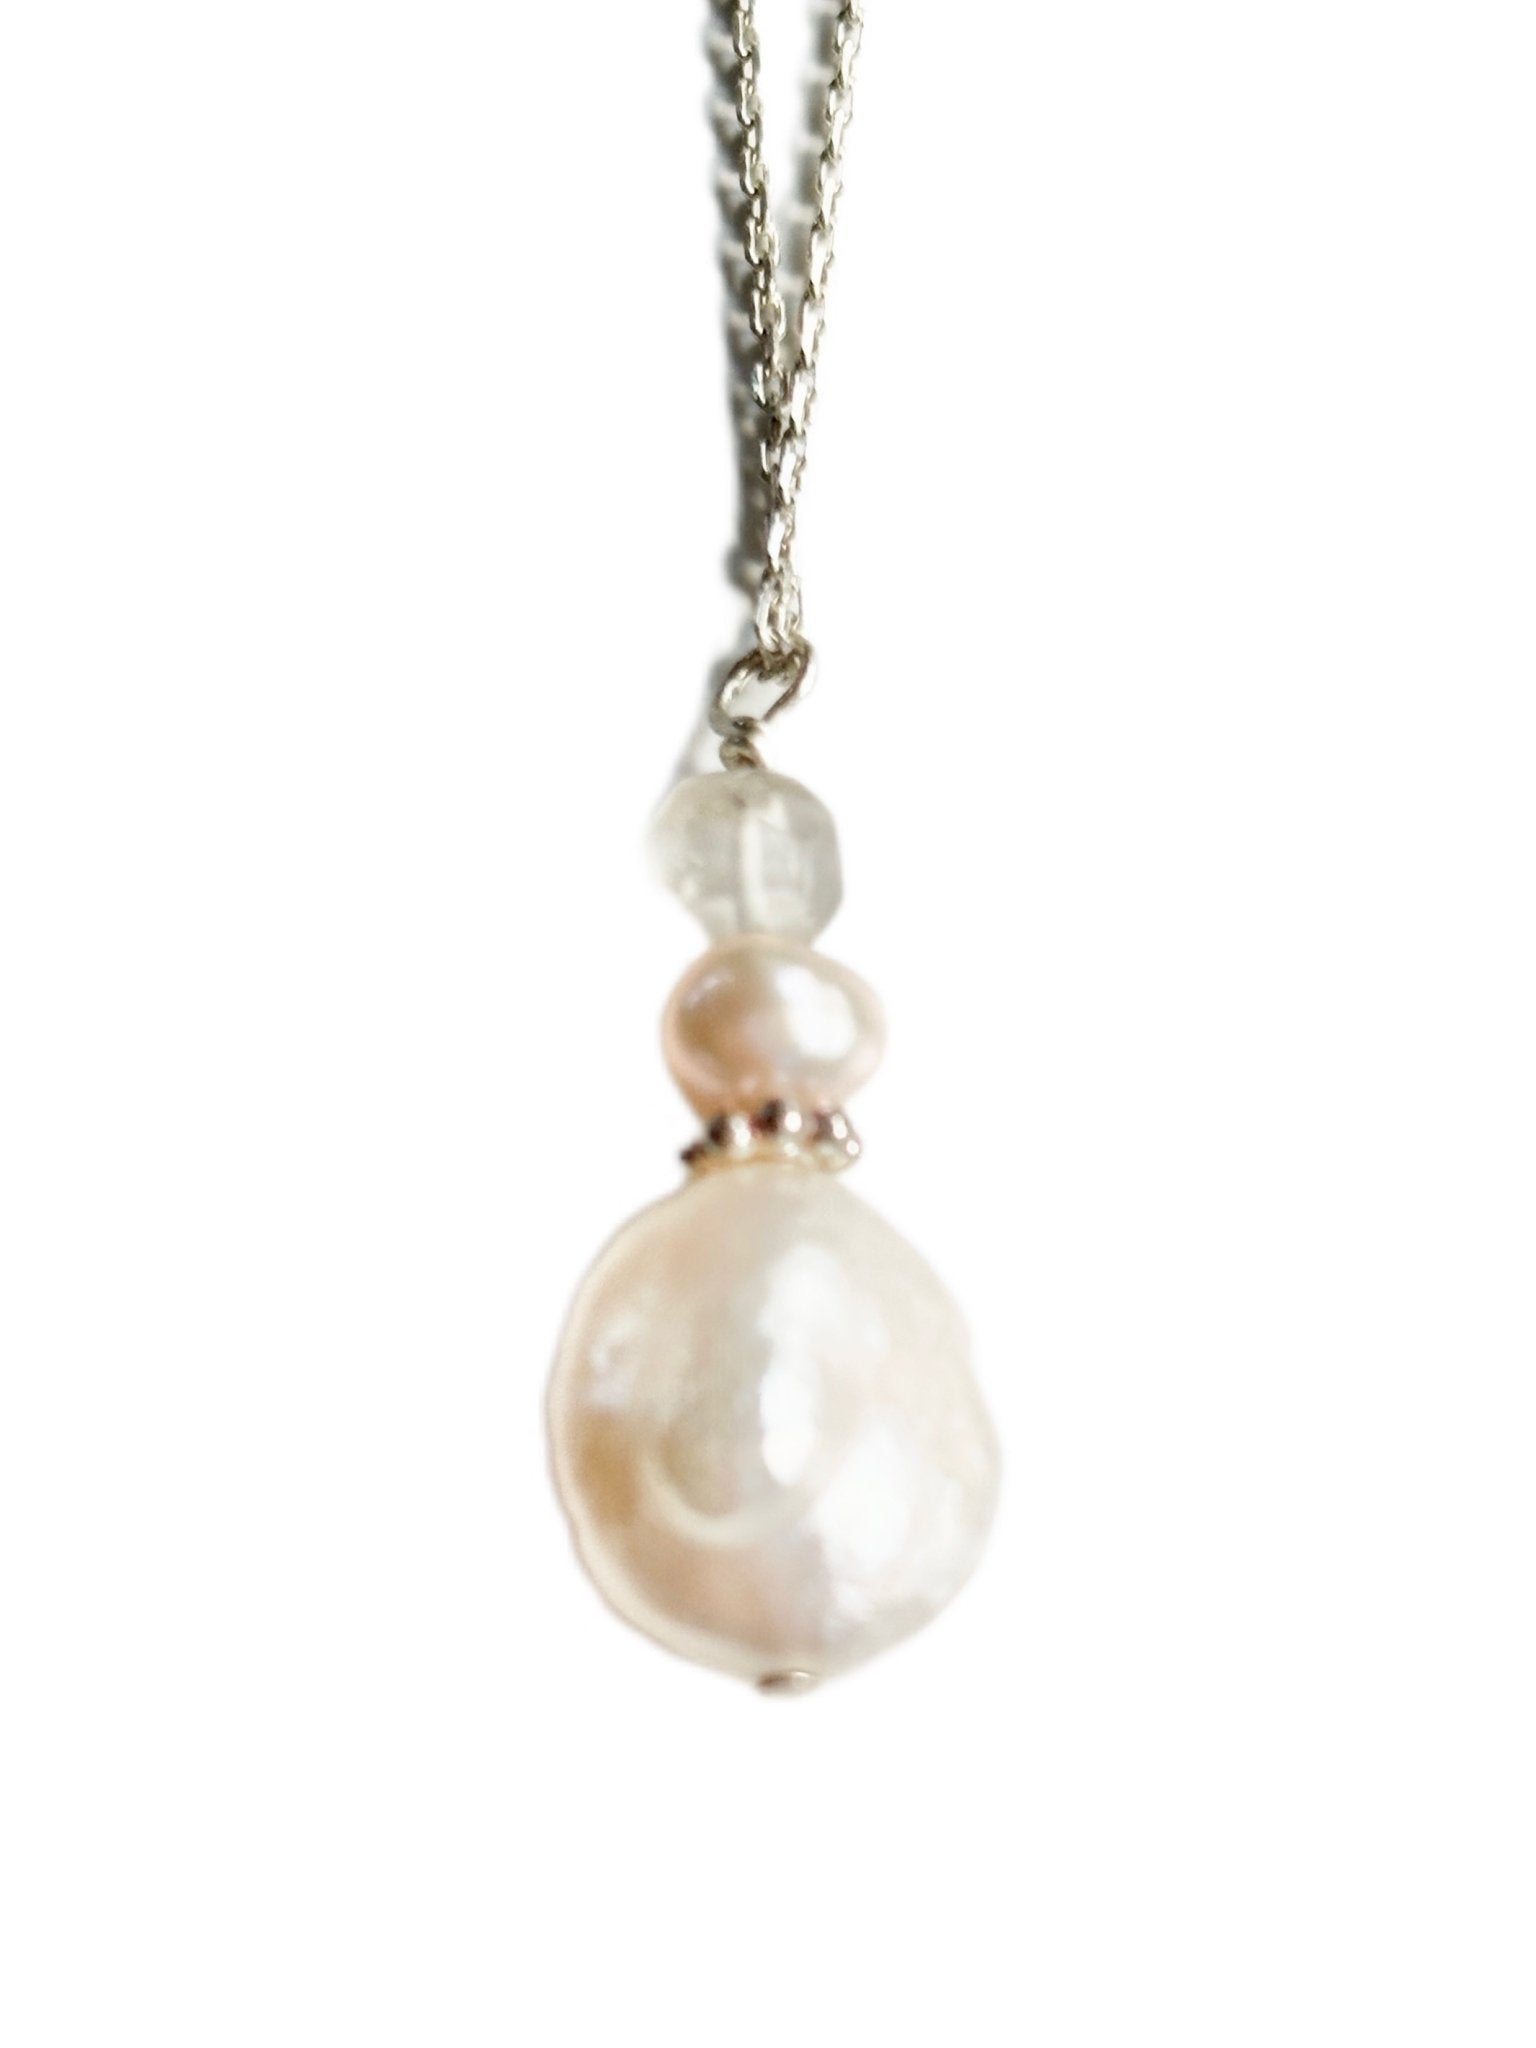 Sterling Silver with Pearl Necklaces - Global Village Kailua Boutique